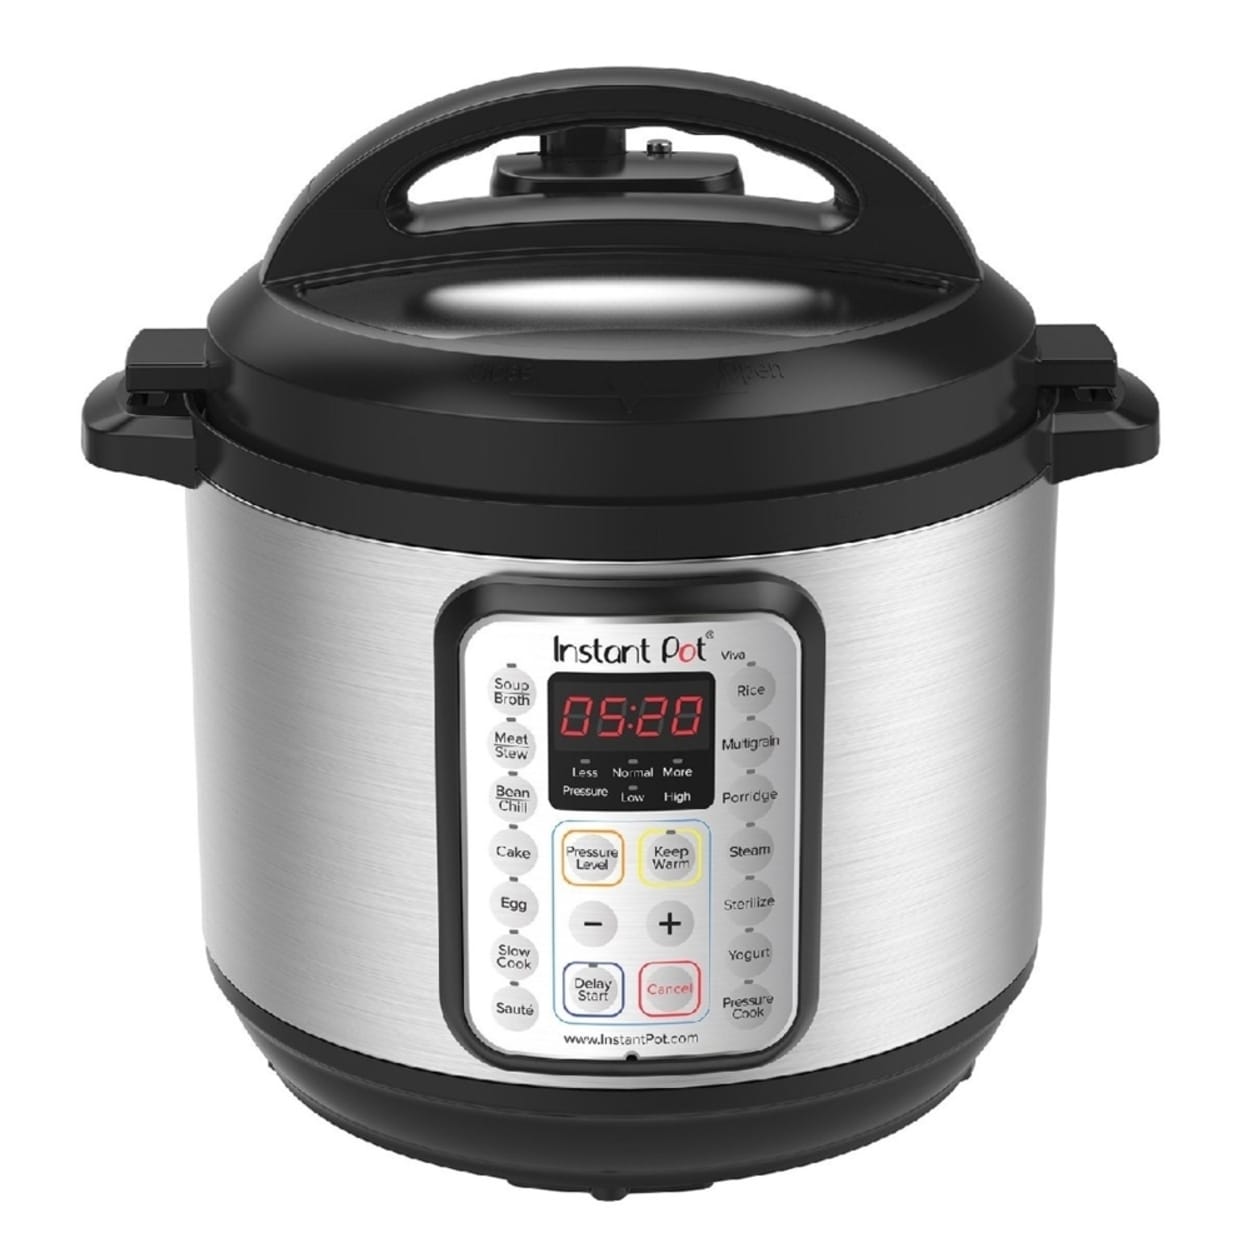 https://ak1.ostkcdn.com/images/products/is/images/direct/04e20b1d285ab41428145b2b04d93e67c5f18c55/Instant-Pot-8-Qt-Viva-9-In-1-Multi-Use-Programmable-Pressure-Cooker.jpg